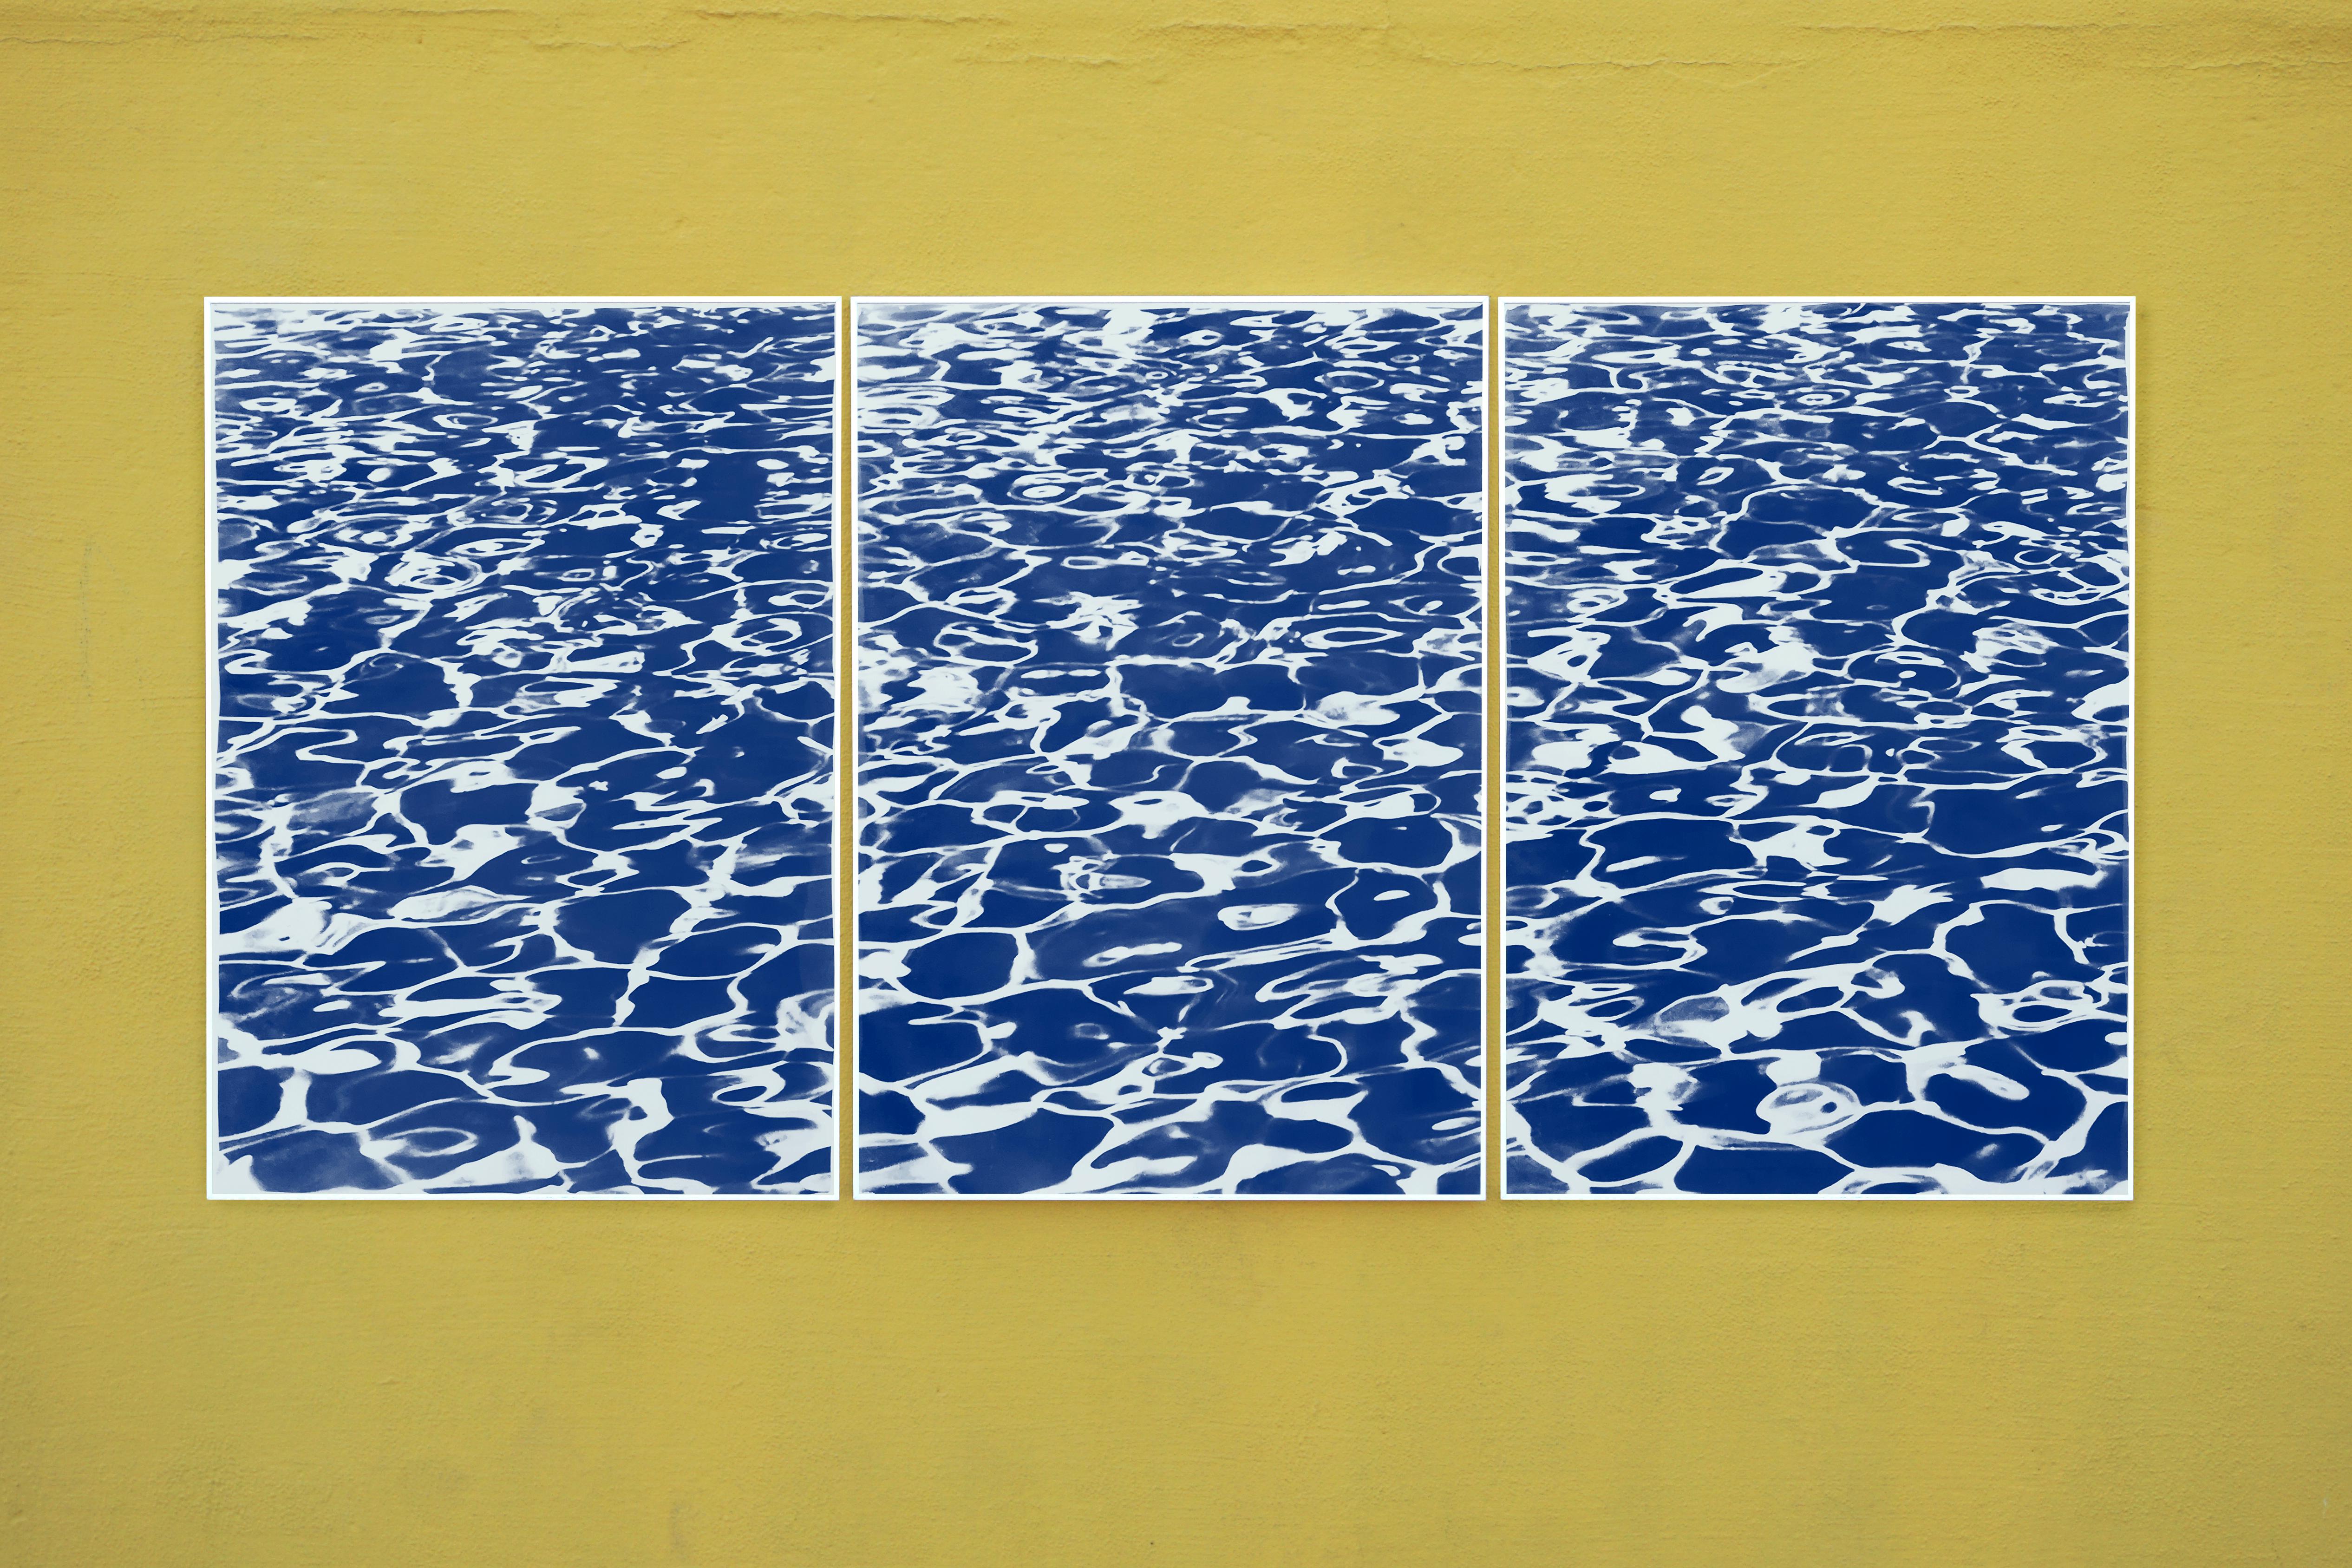 Pool Patterns, Nautical Abstract Seascape Triptych, Blue Cyanotype Print 5